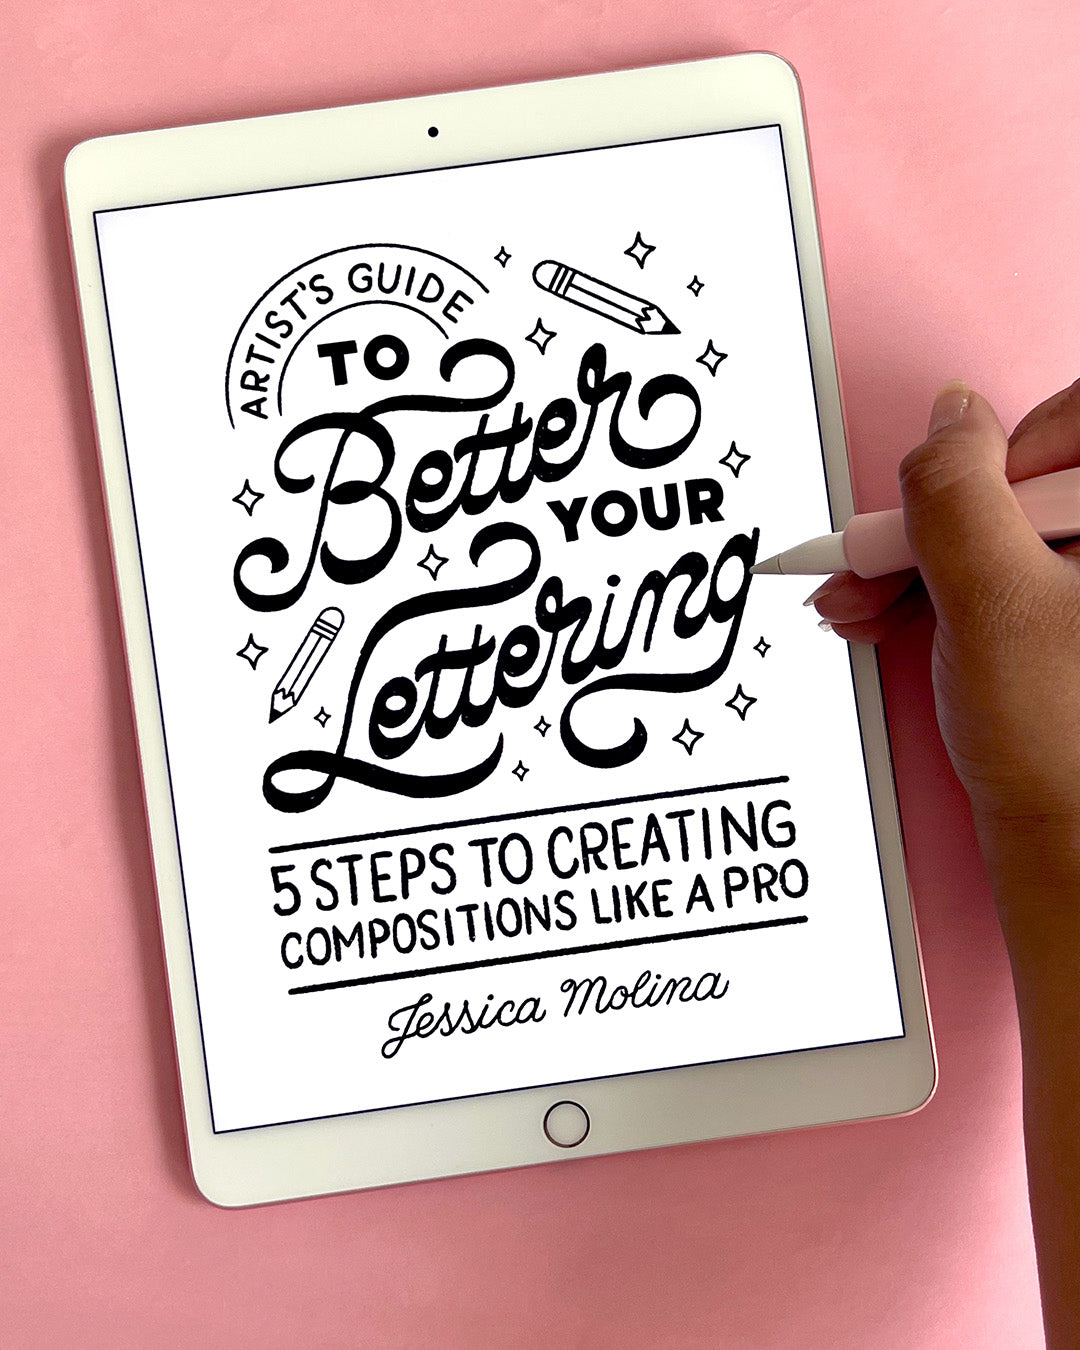 Artist's Guide to Better Your Lettering: 5 Steps to Creating Compositions Like A Pro